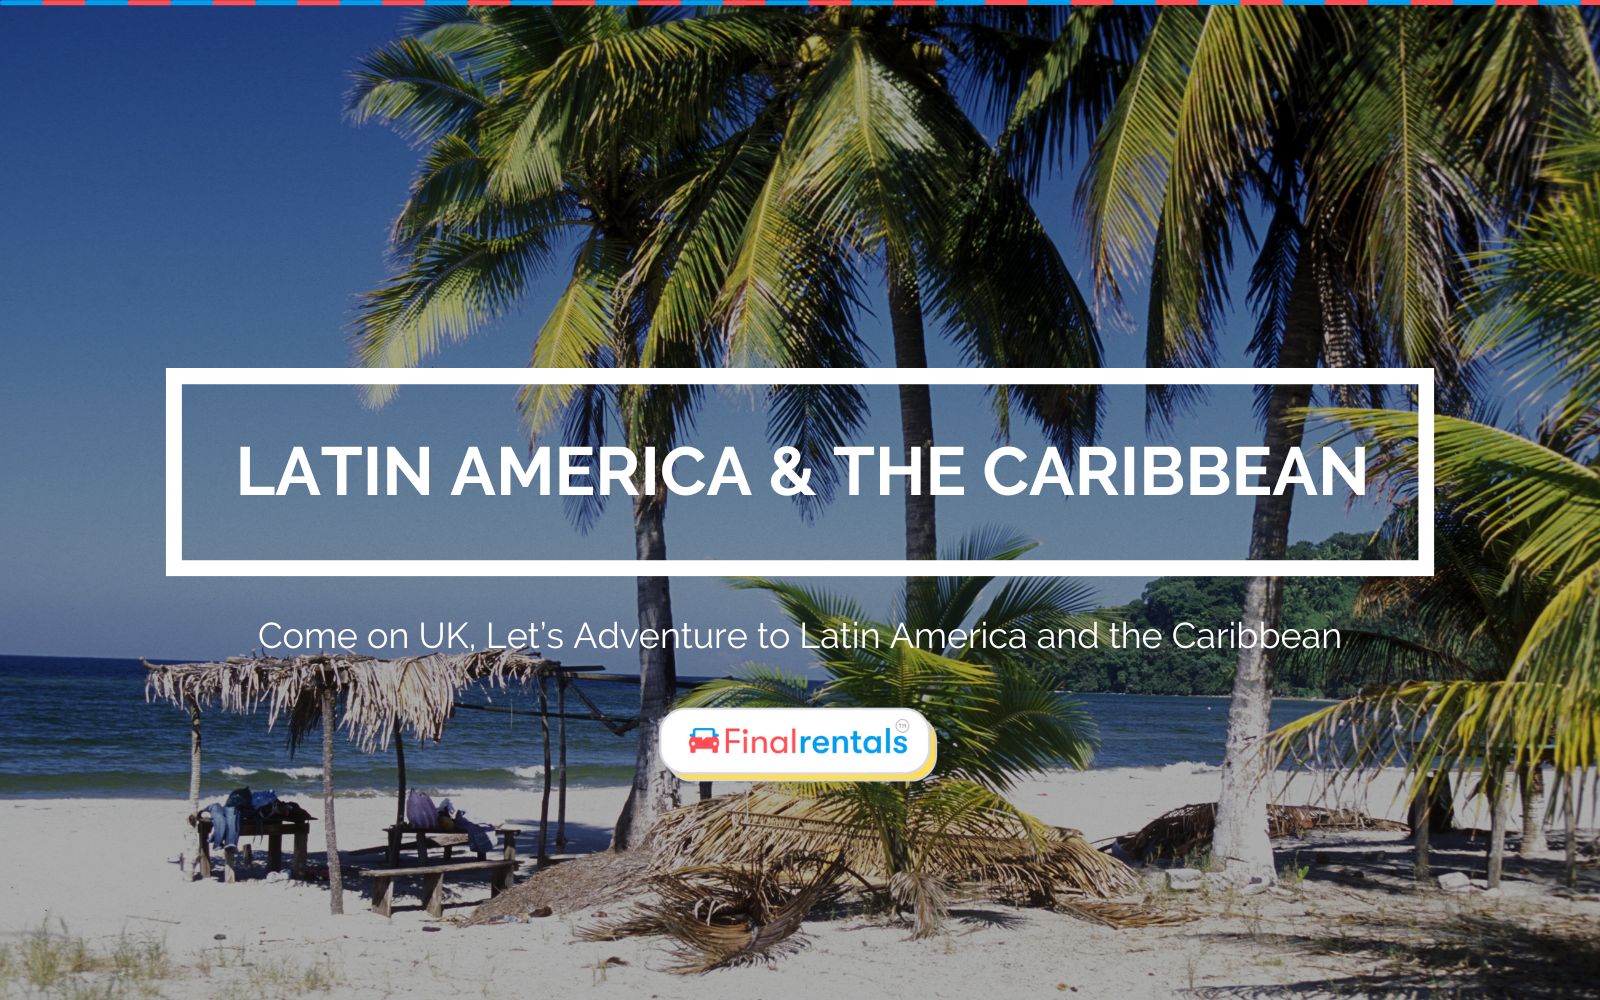 Come on UK, Let’s Adventure to Latin America and the Caribbean